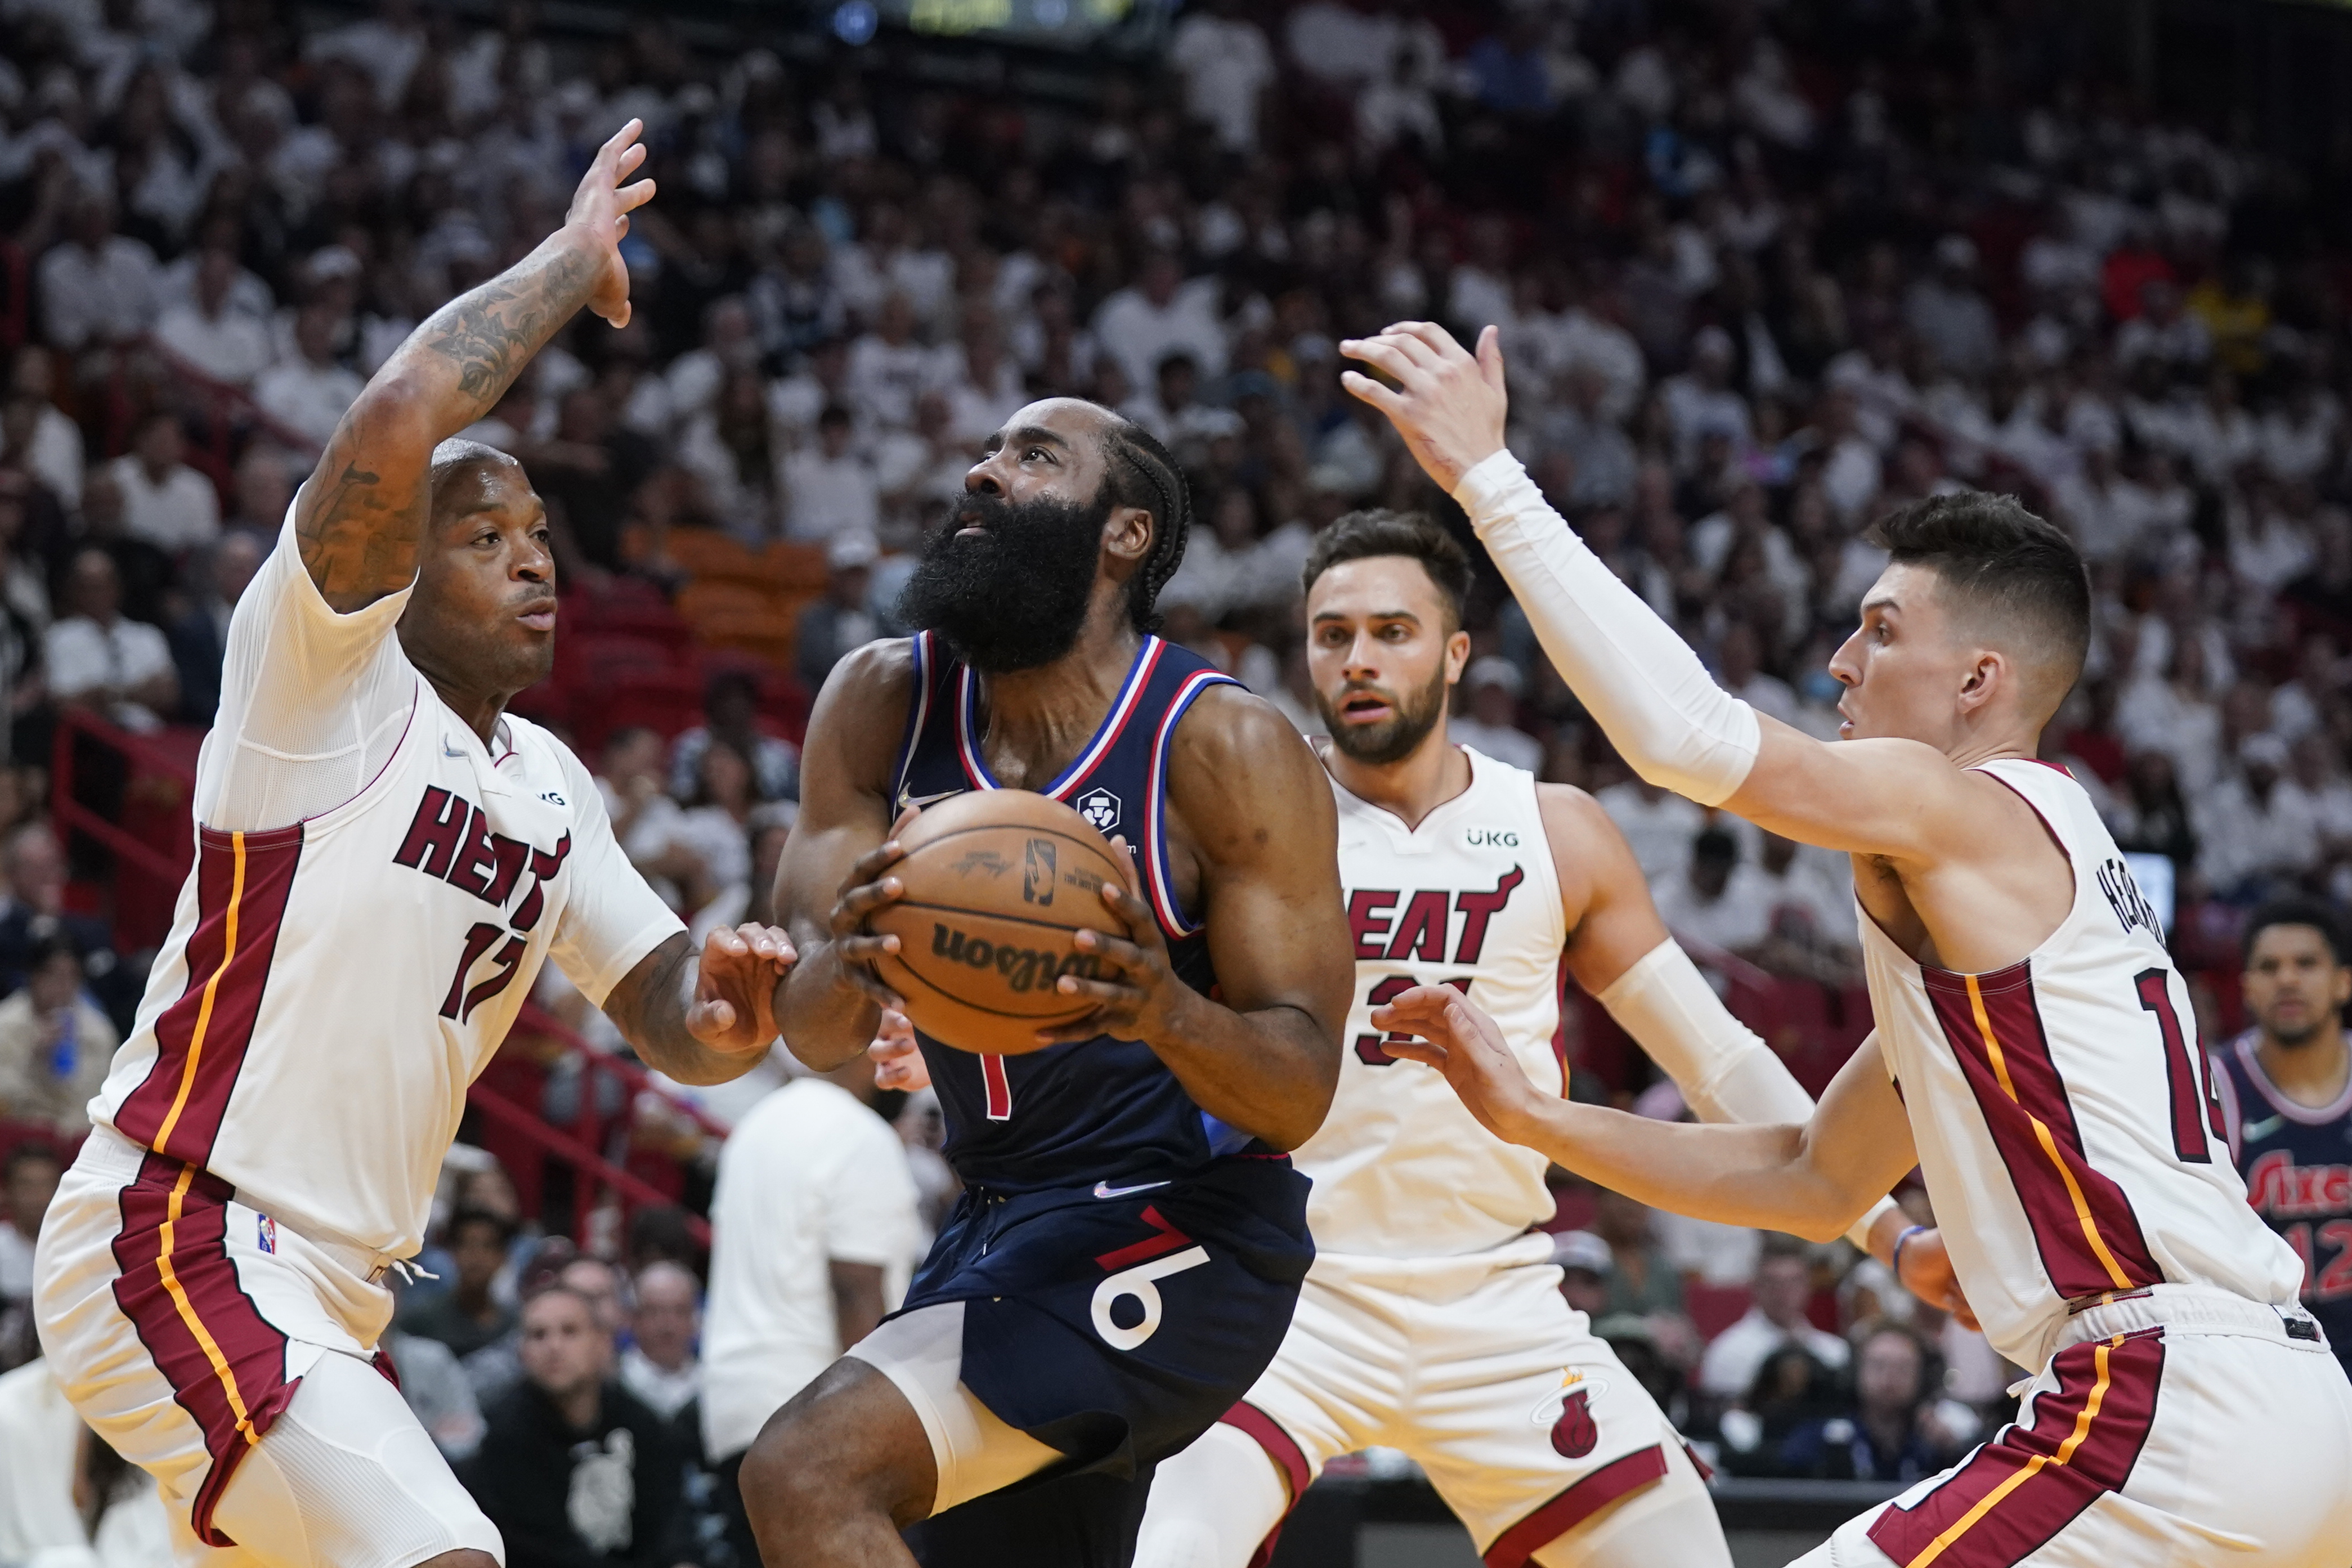 Heat beat 76ers 99-90 in Game 6 to advance to East finals - WHYY